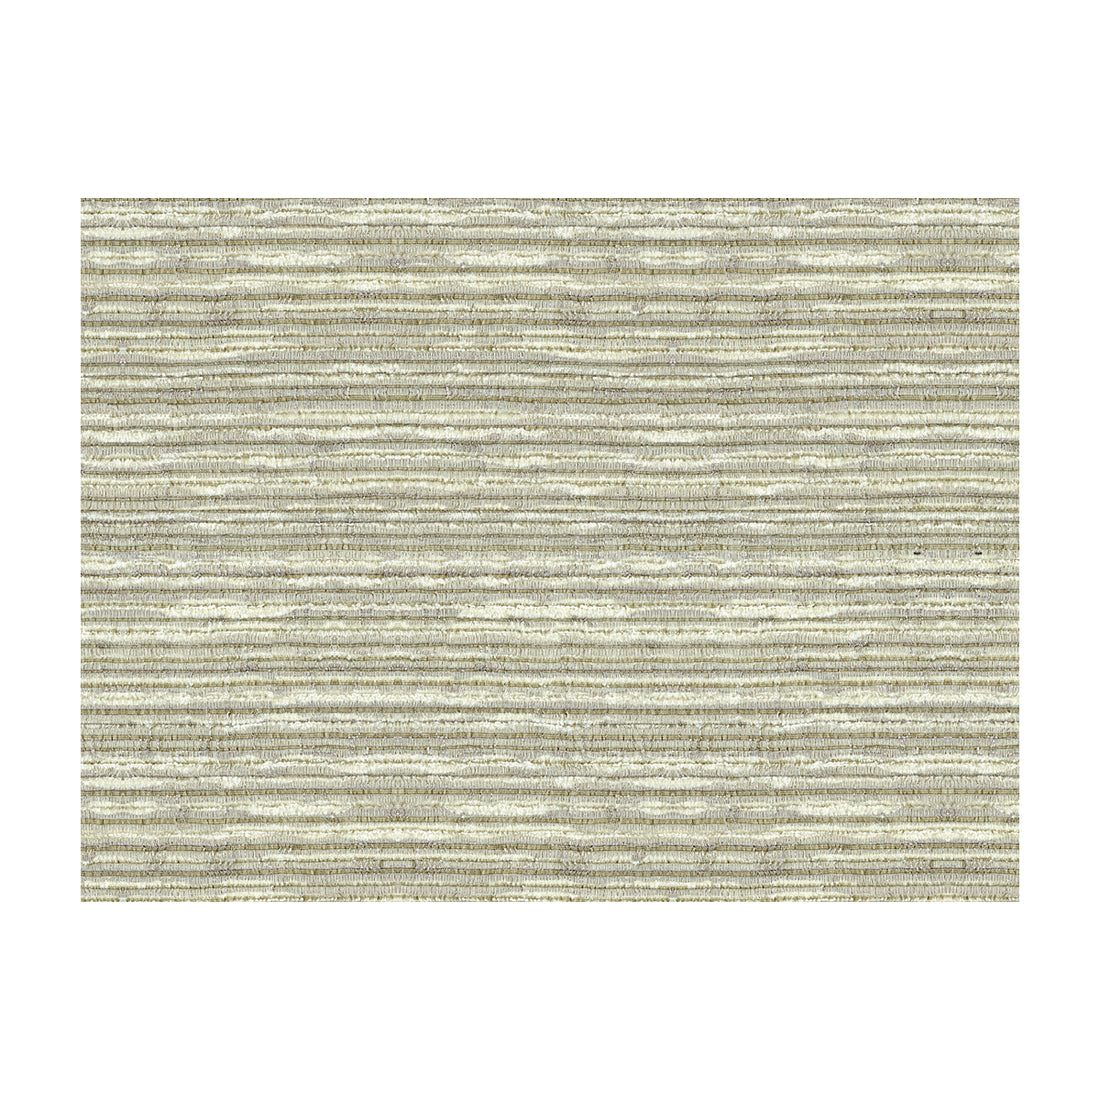 Kravet Couture fabric in 33244-11 color - pattern 33244.11.0 - by Kravet Couture in the Kravet Colors collection